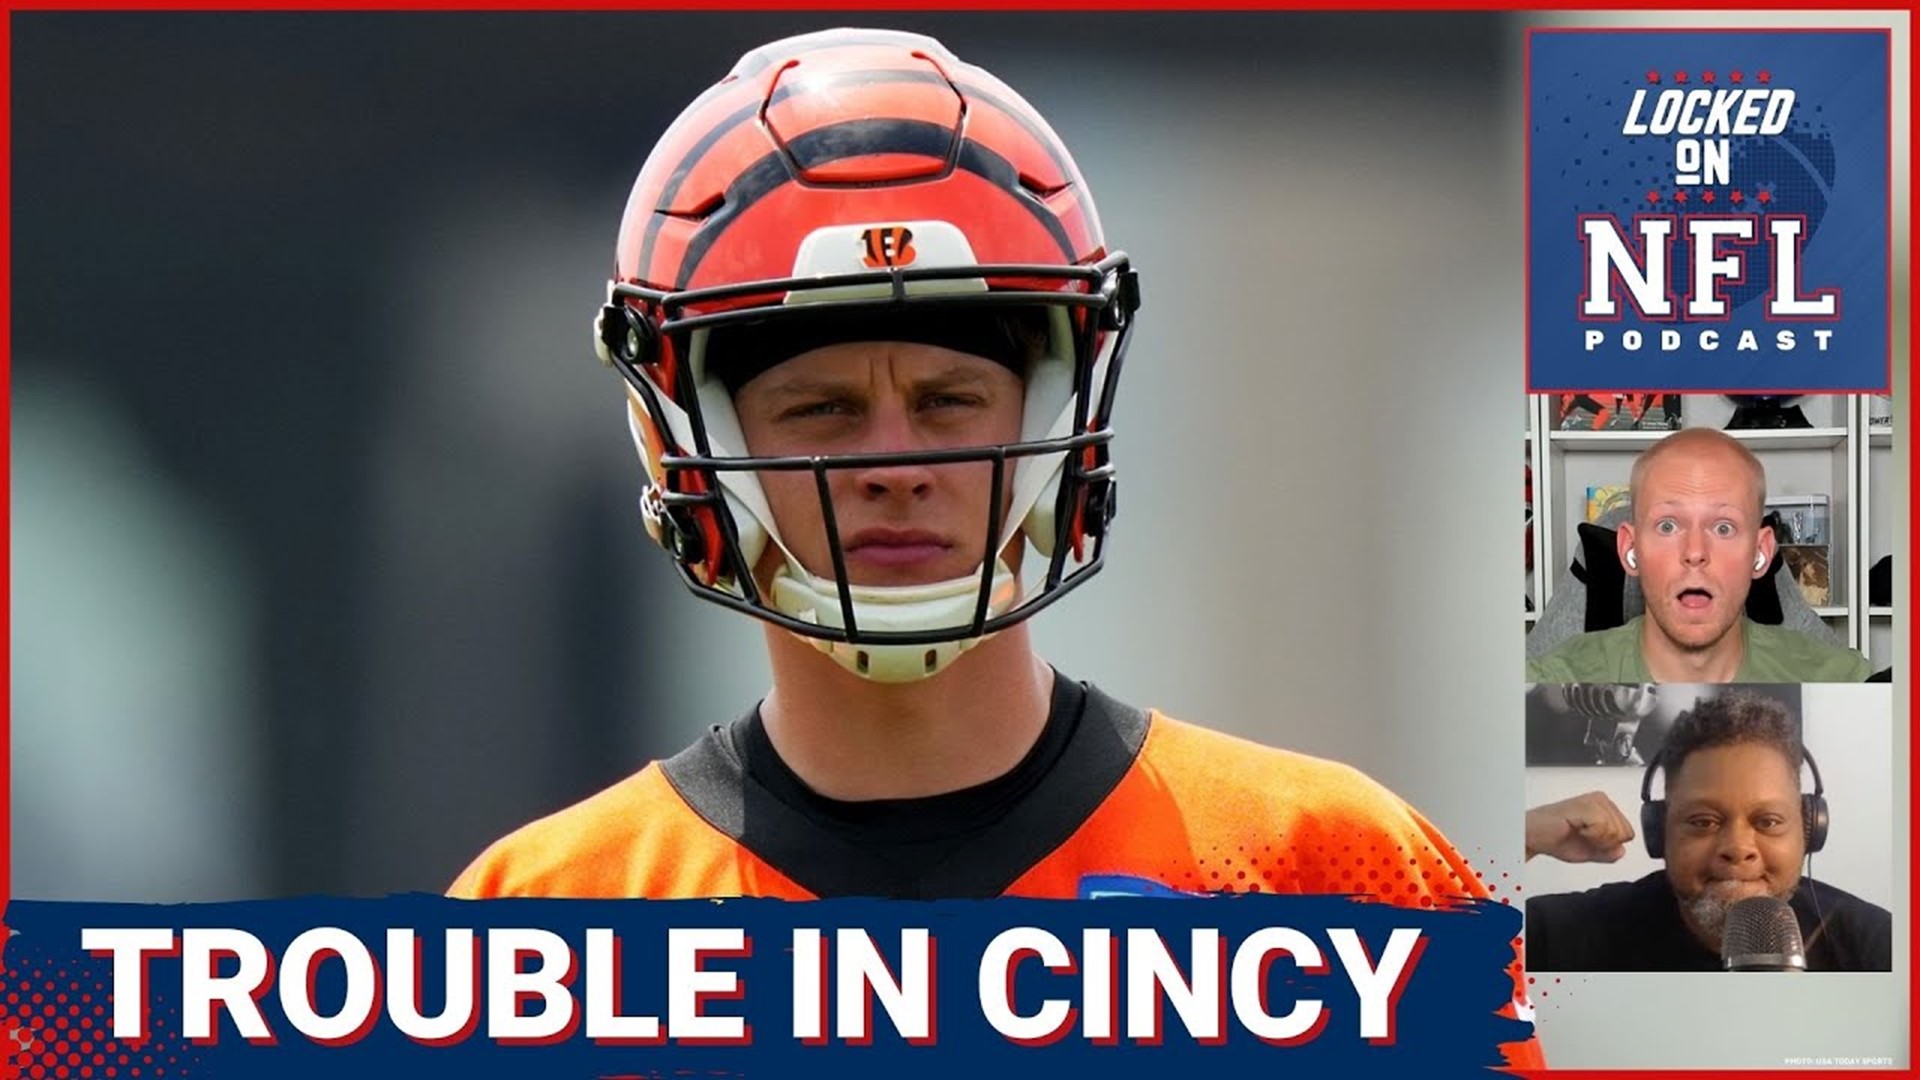 Can Joe Burrow and the Cincinnati Bengals turn it around after an 0-2 start? Are the Dallas Cowboys the NFL's best team?